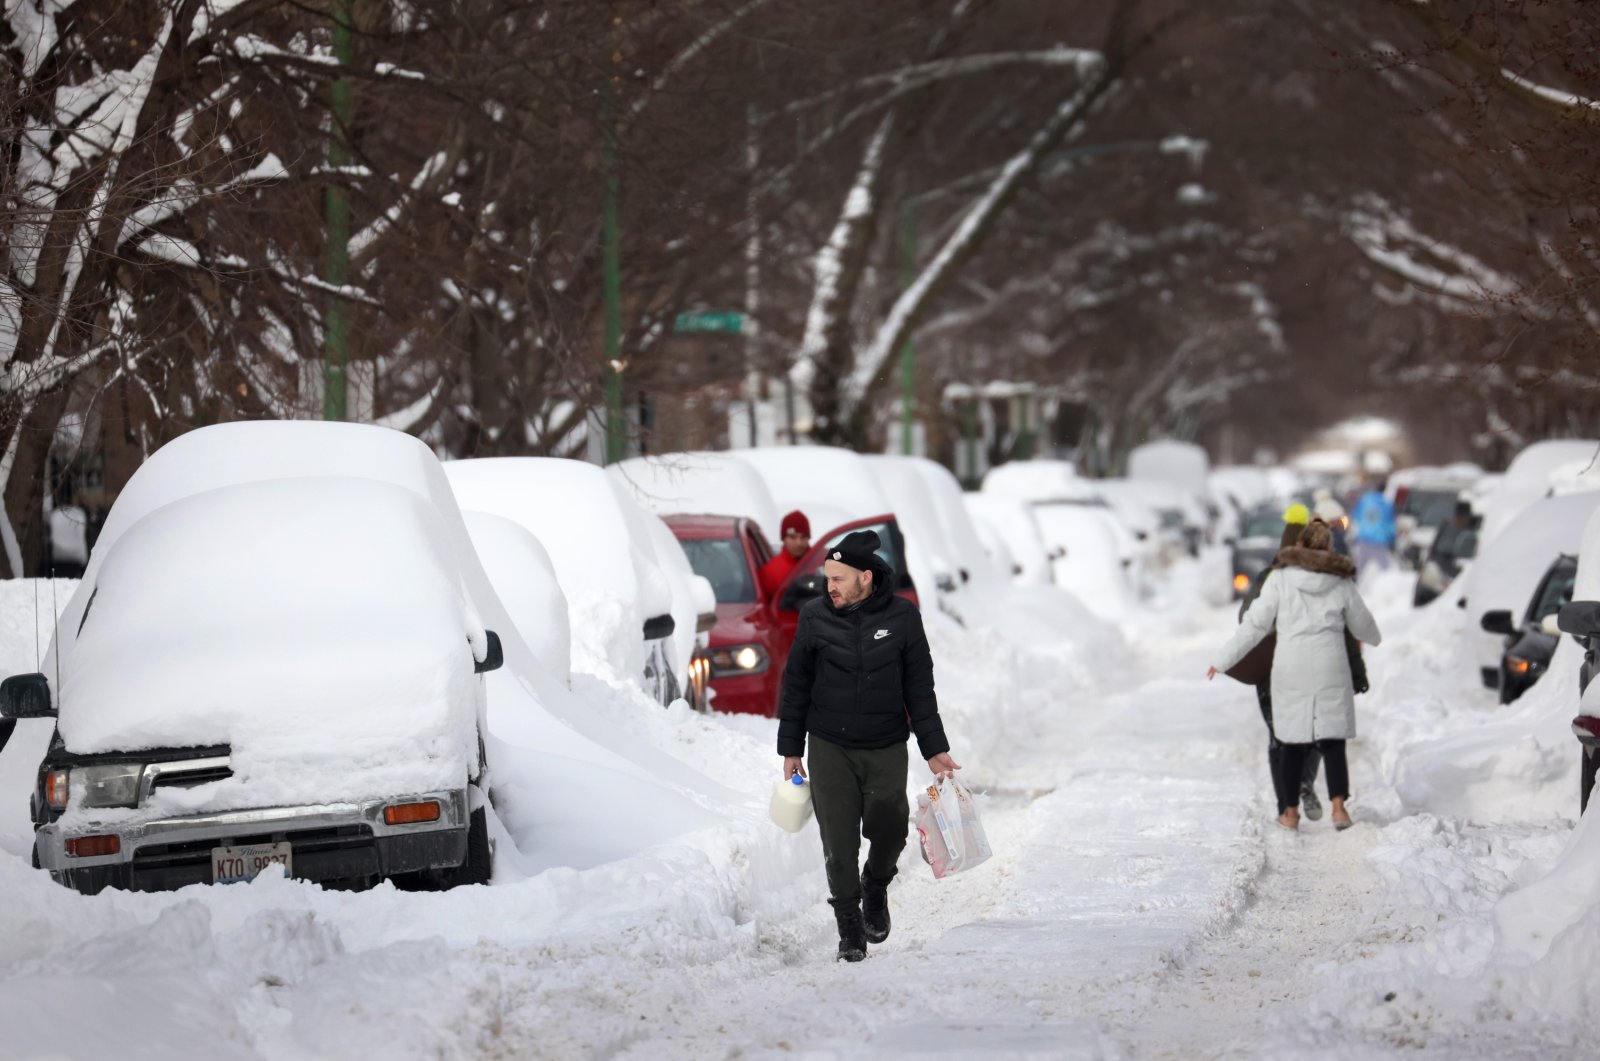 People navigate a snow-covered street in Chicago, Illinois, U.S., Feb. 16, 2021. (AFP Photo)